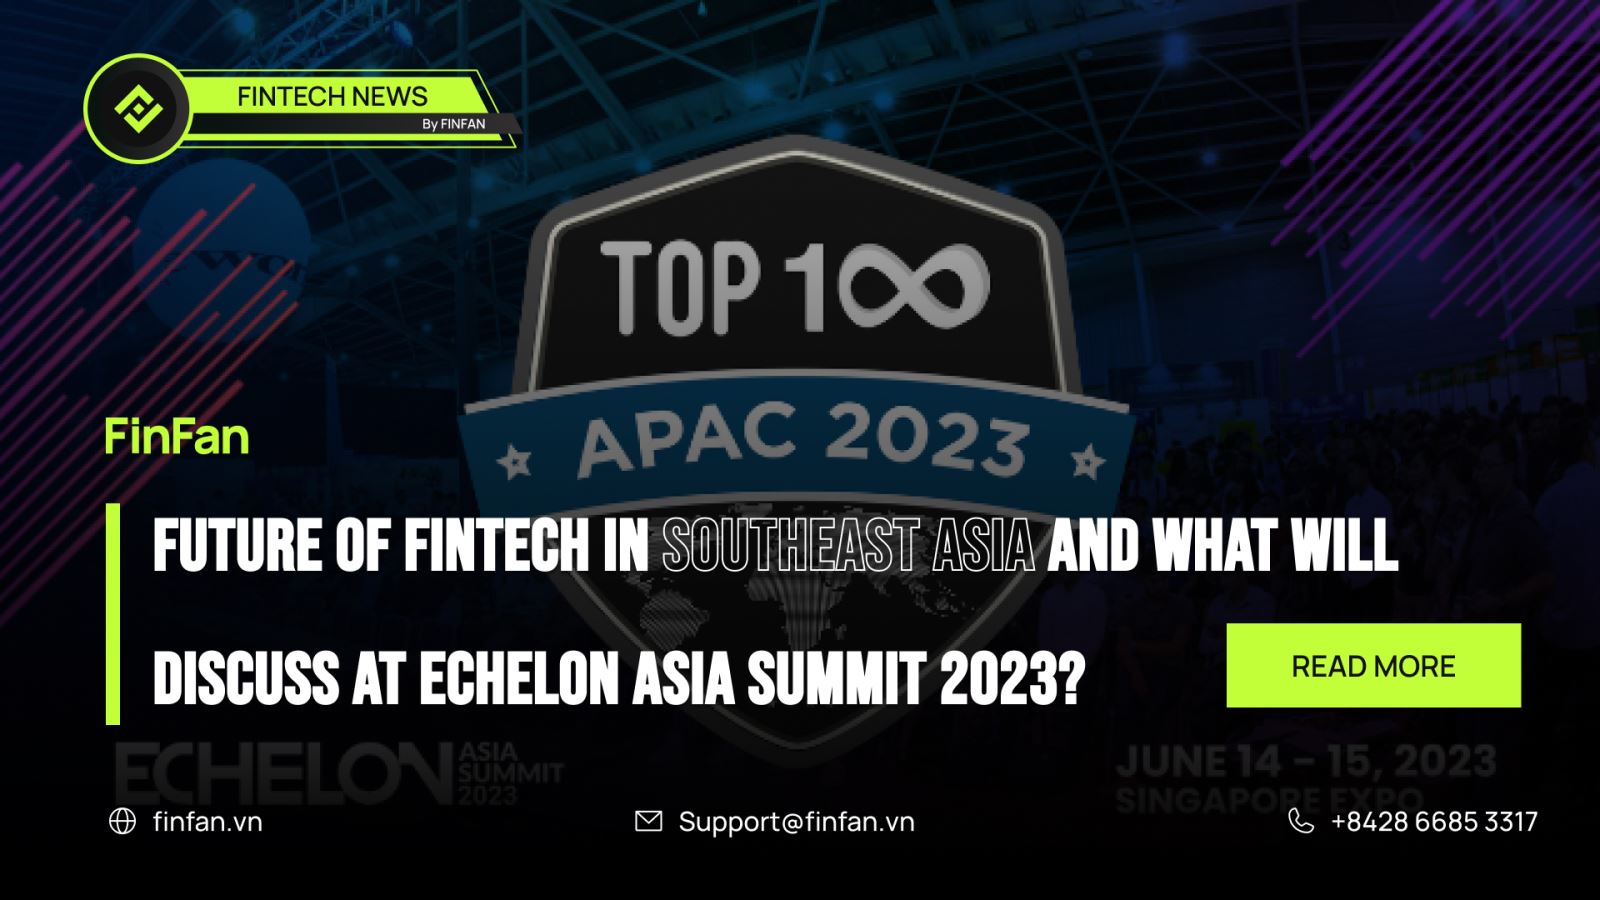 Future of fintech in Southeast Asia and what will discuss at Echelon Asia Summit 2023?